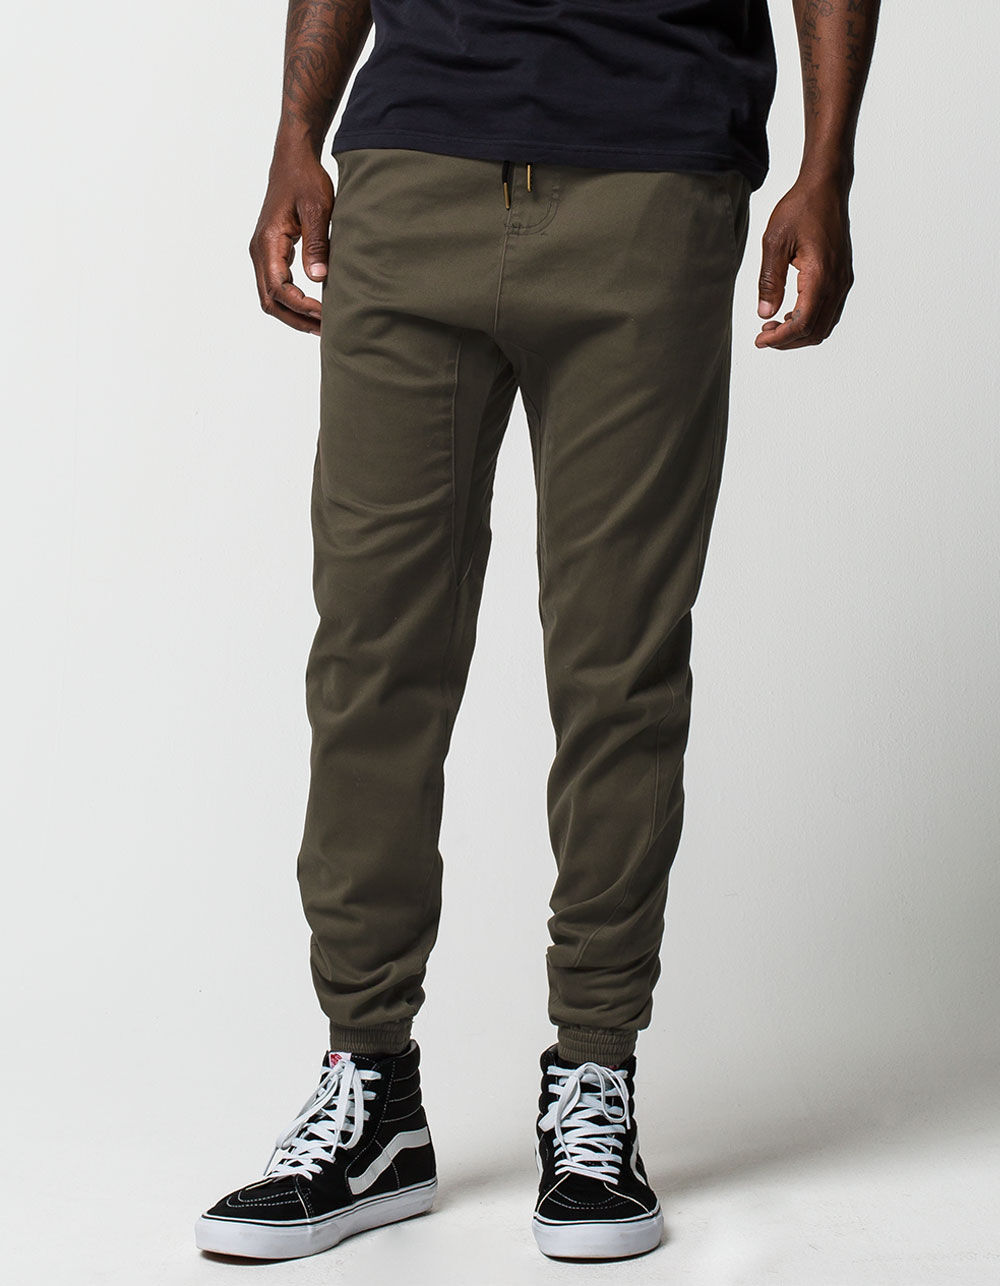 CHARLES AND A HALF Olive Mens Twill Jogger Pants - OLIVE | Tillys